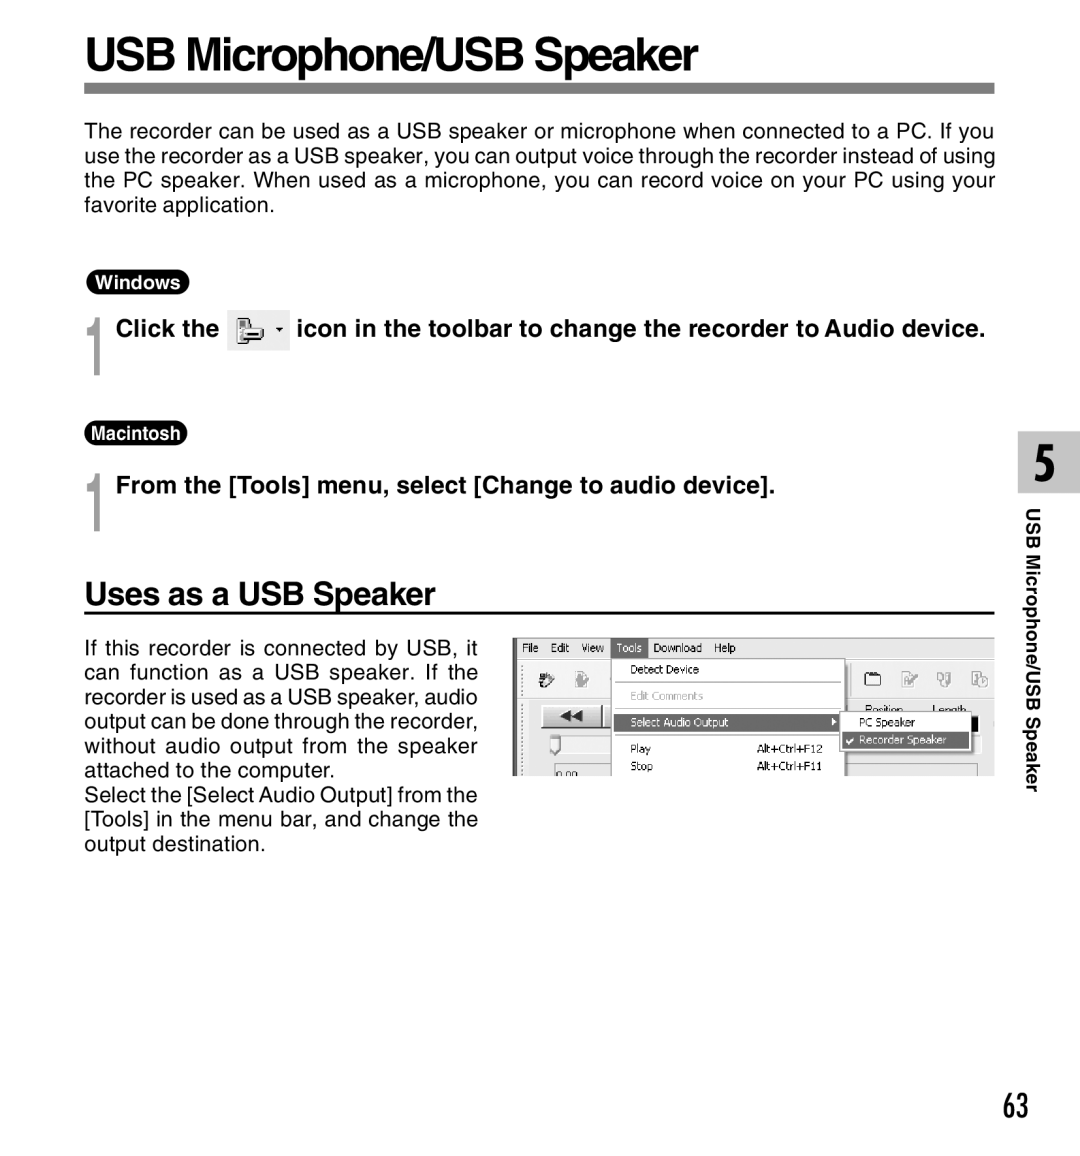 Olympus DS-2300 USB Microphone/USB Speaker, Uses as a USB Speaker, From the Tools menu, select Change to audio device 